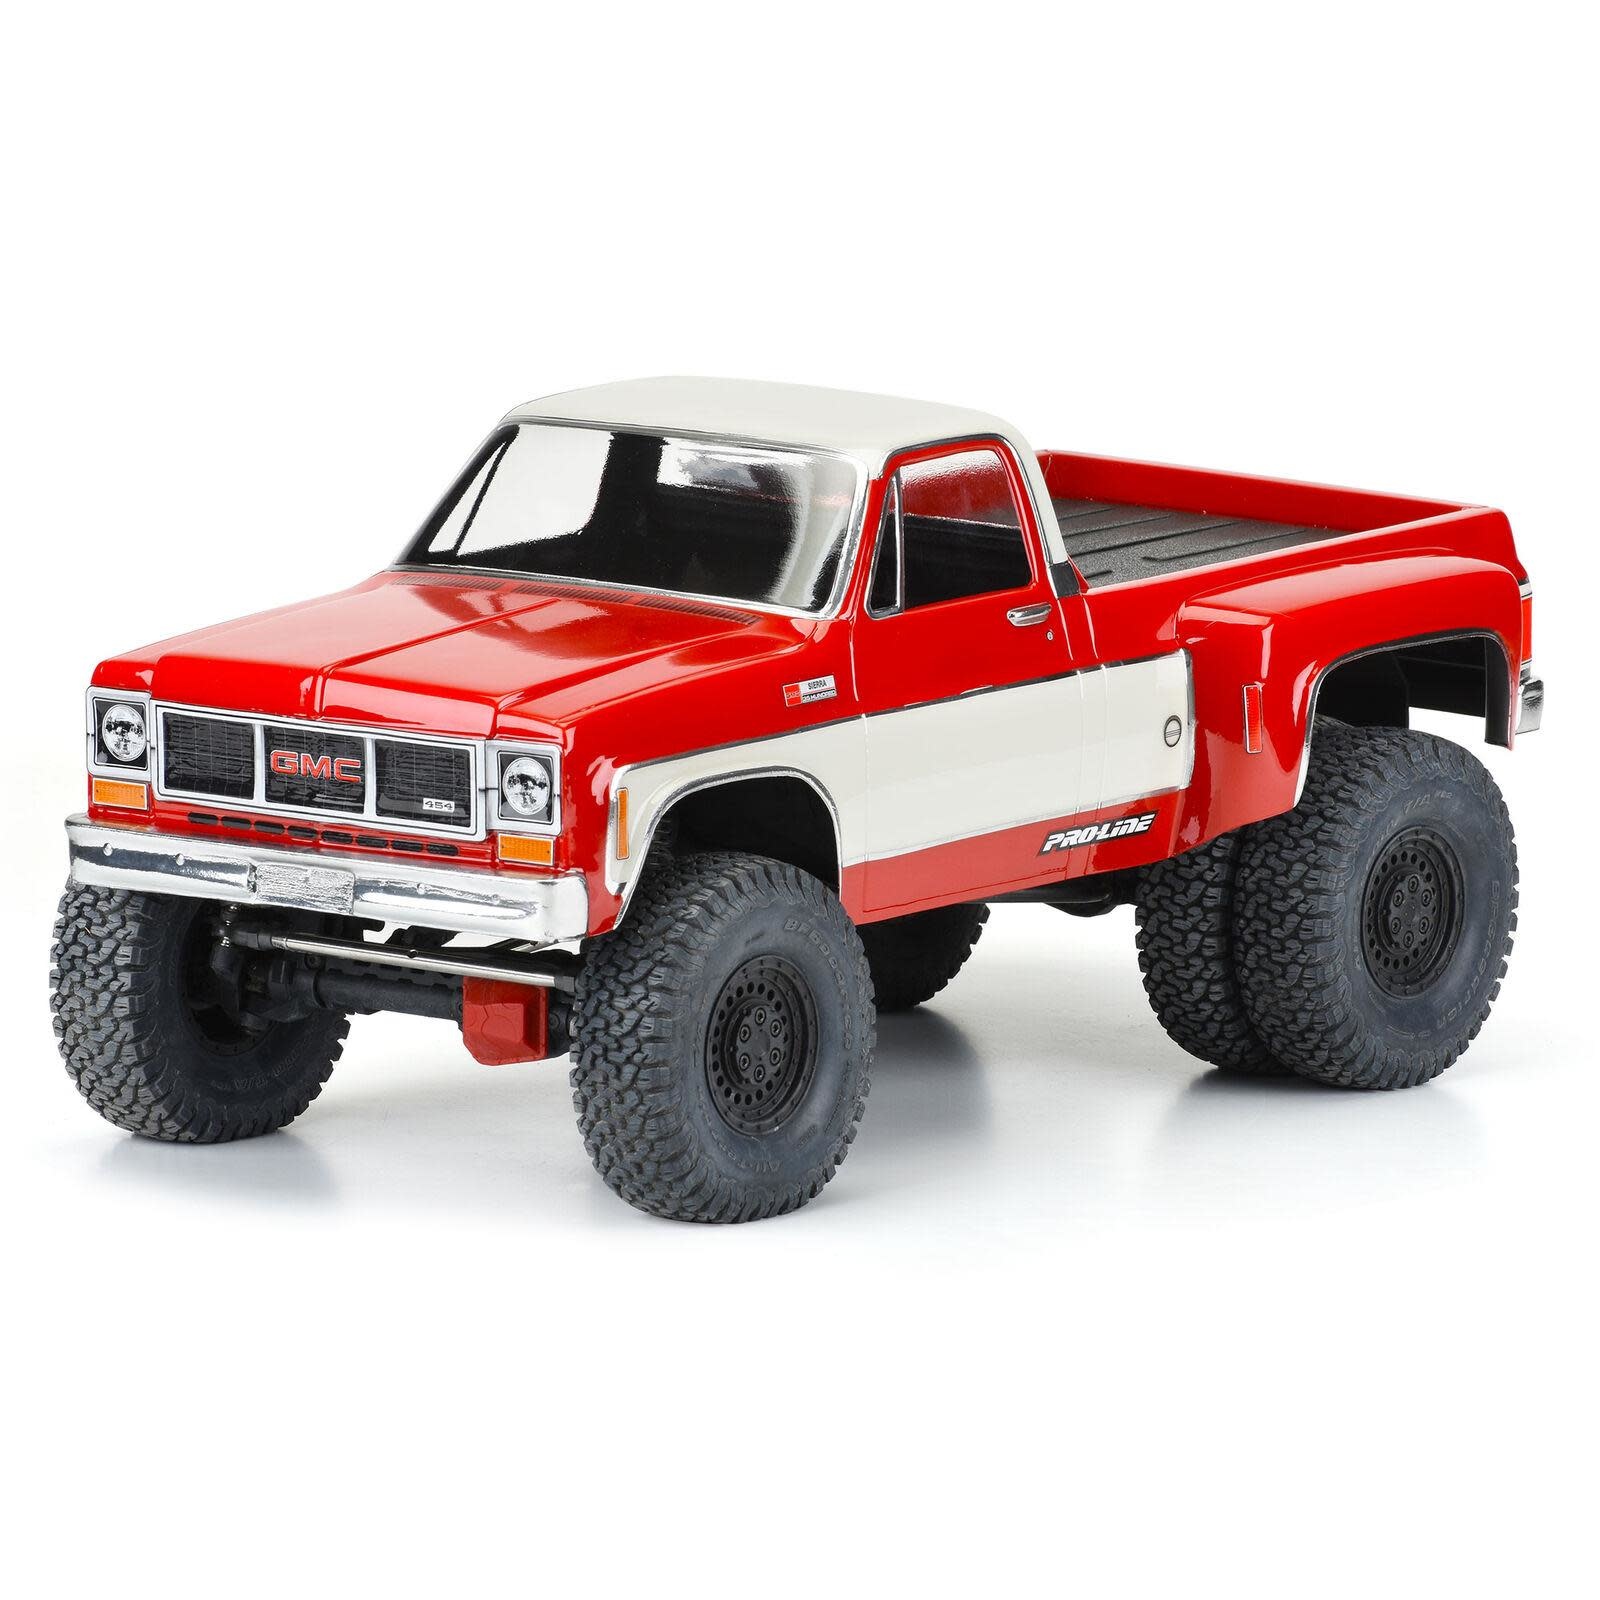 1973 GMC Sierra 3500 Clear Body for 12.3" (313mm) Wheelbase Scale Crawlers with PRO278600 Carbine Dually Wheels-2